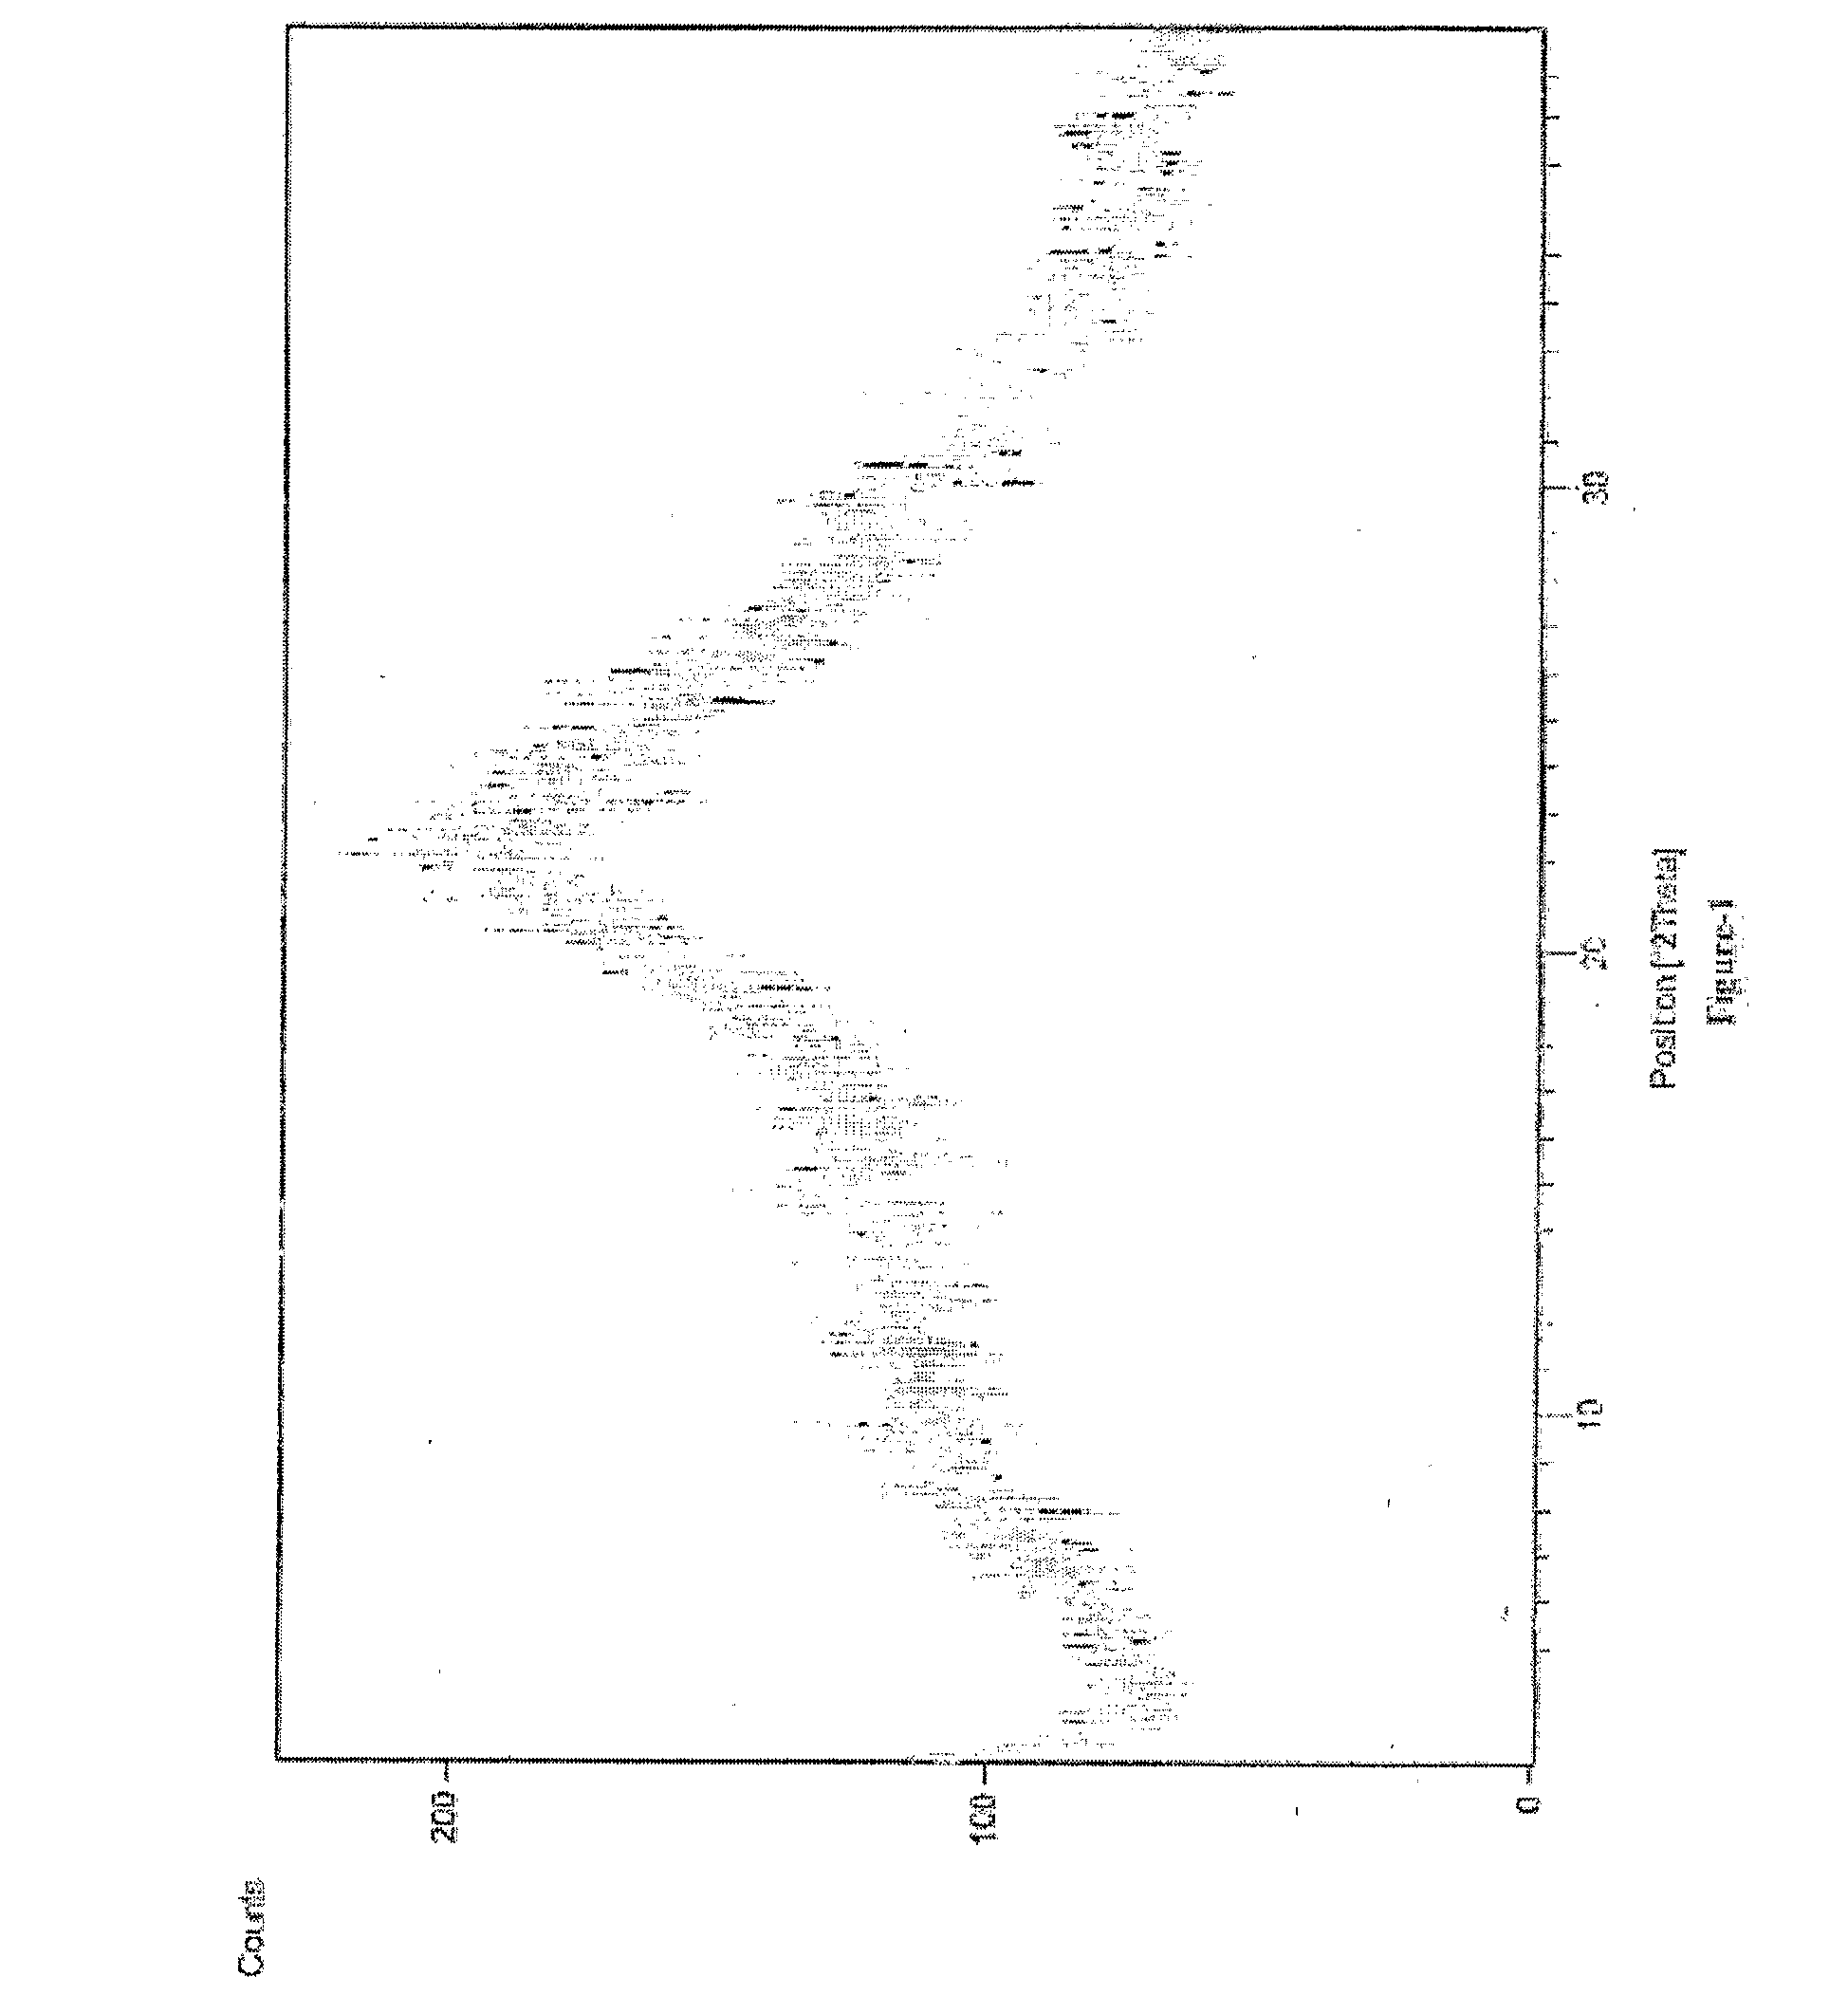 Process for the preparation of pentosan polysulfate or salts thereof